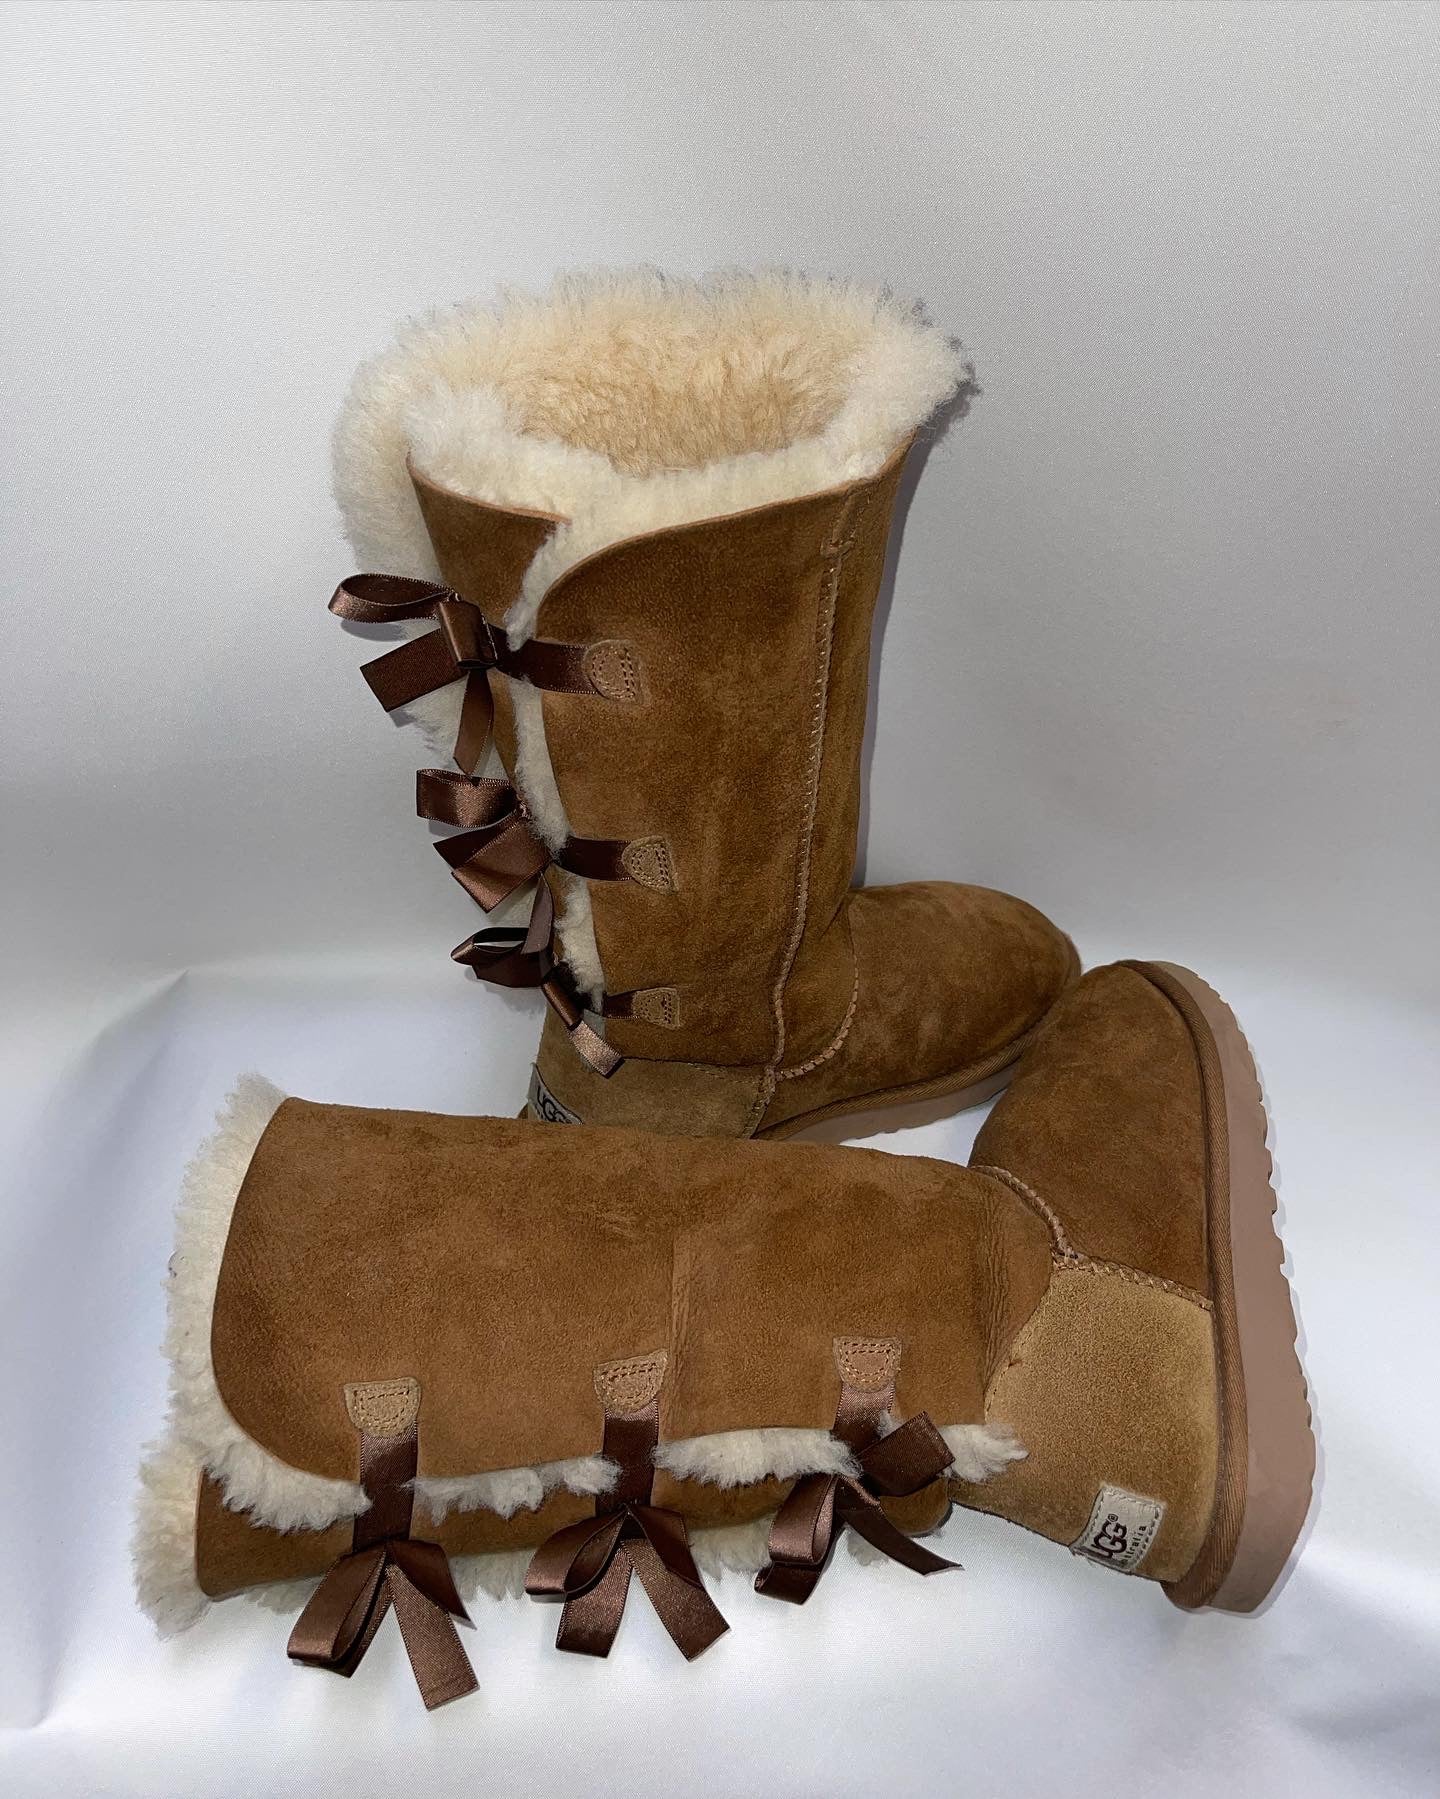 UGG Brown Boots